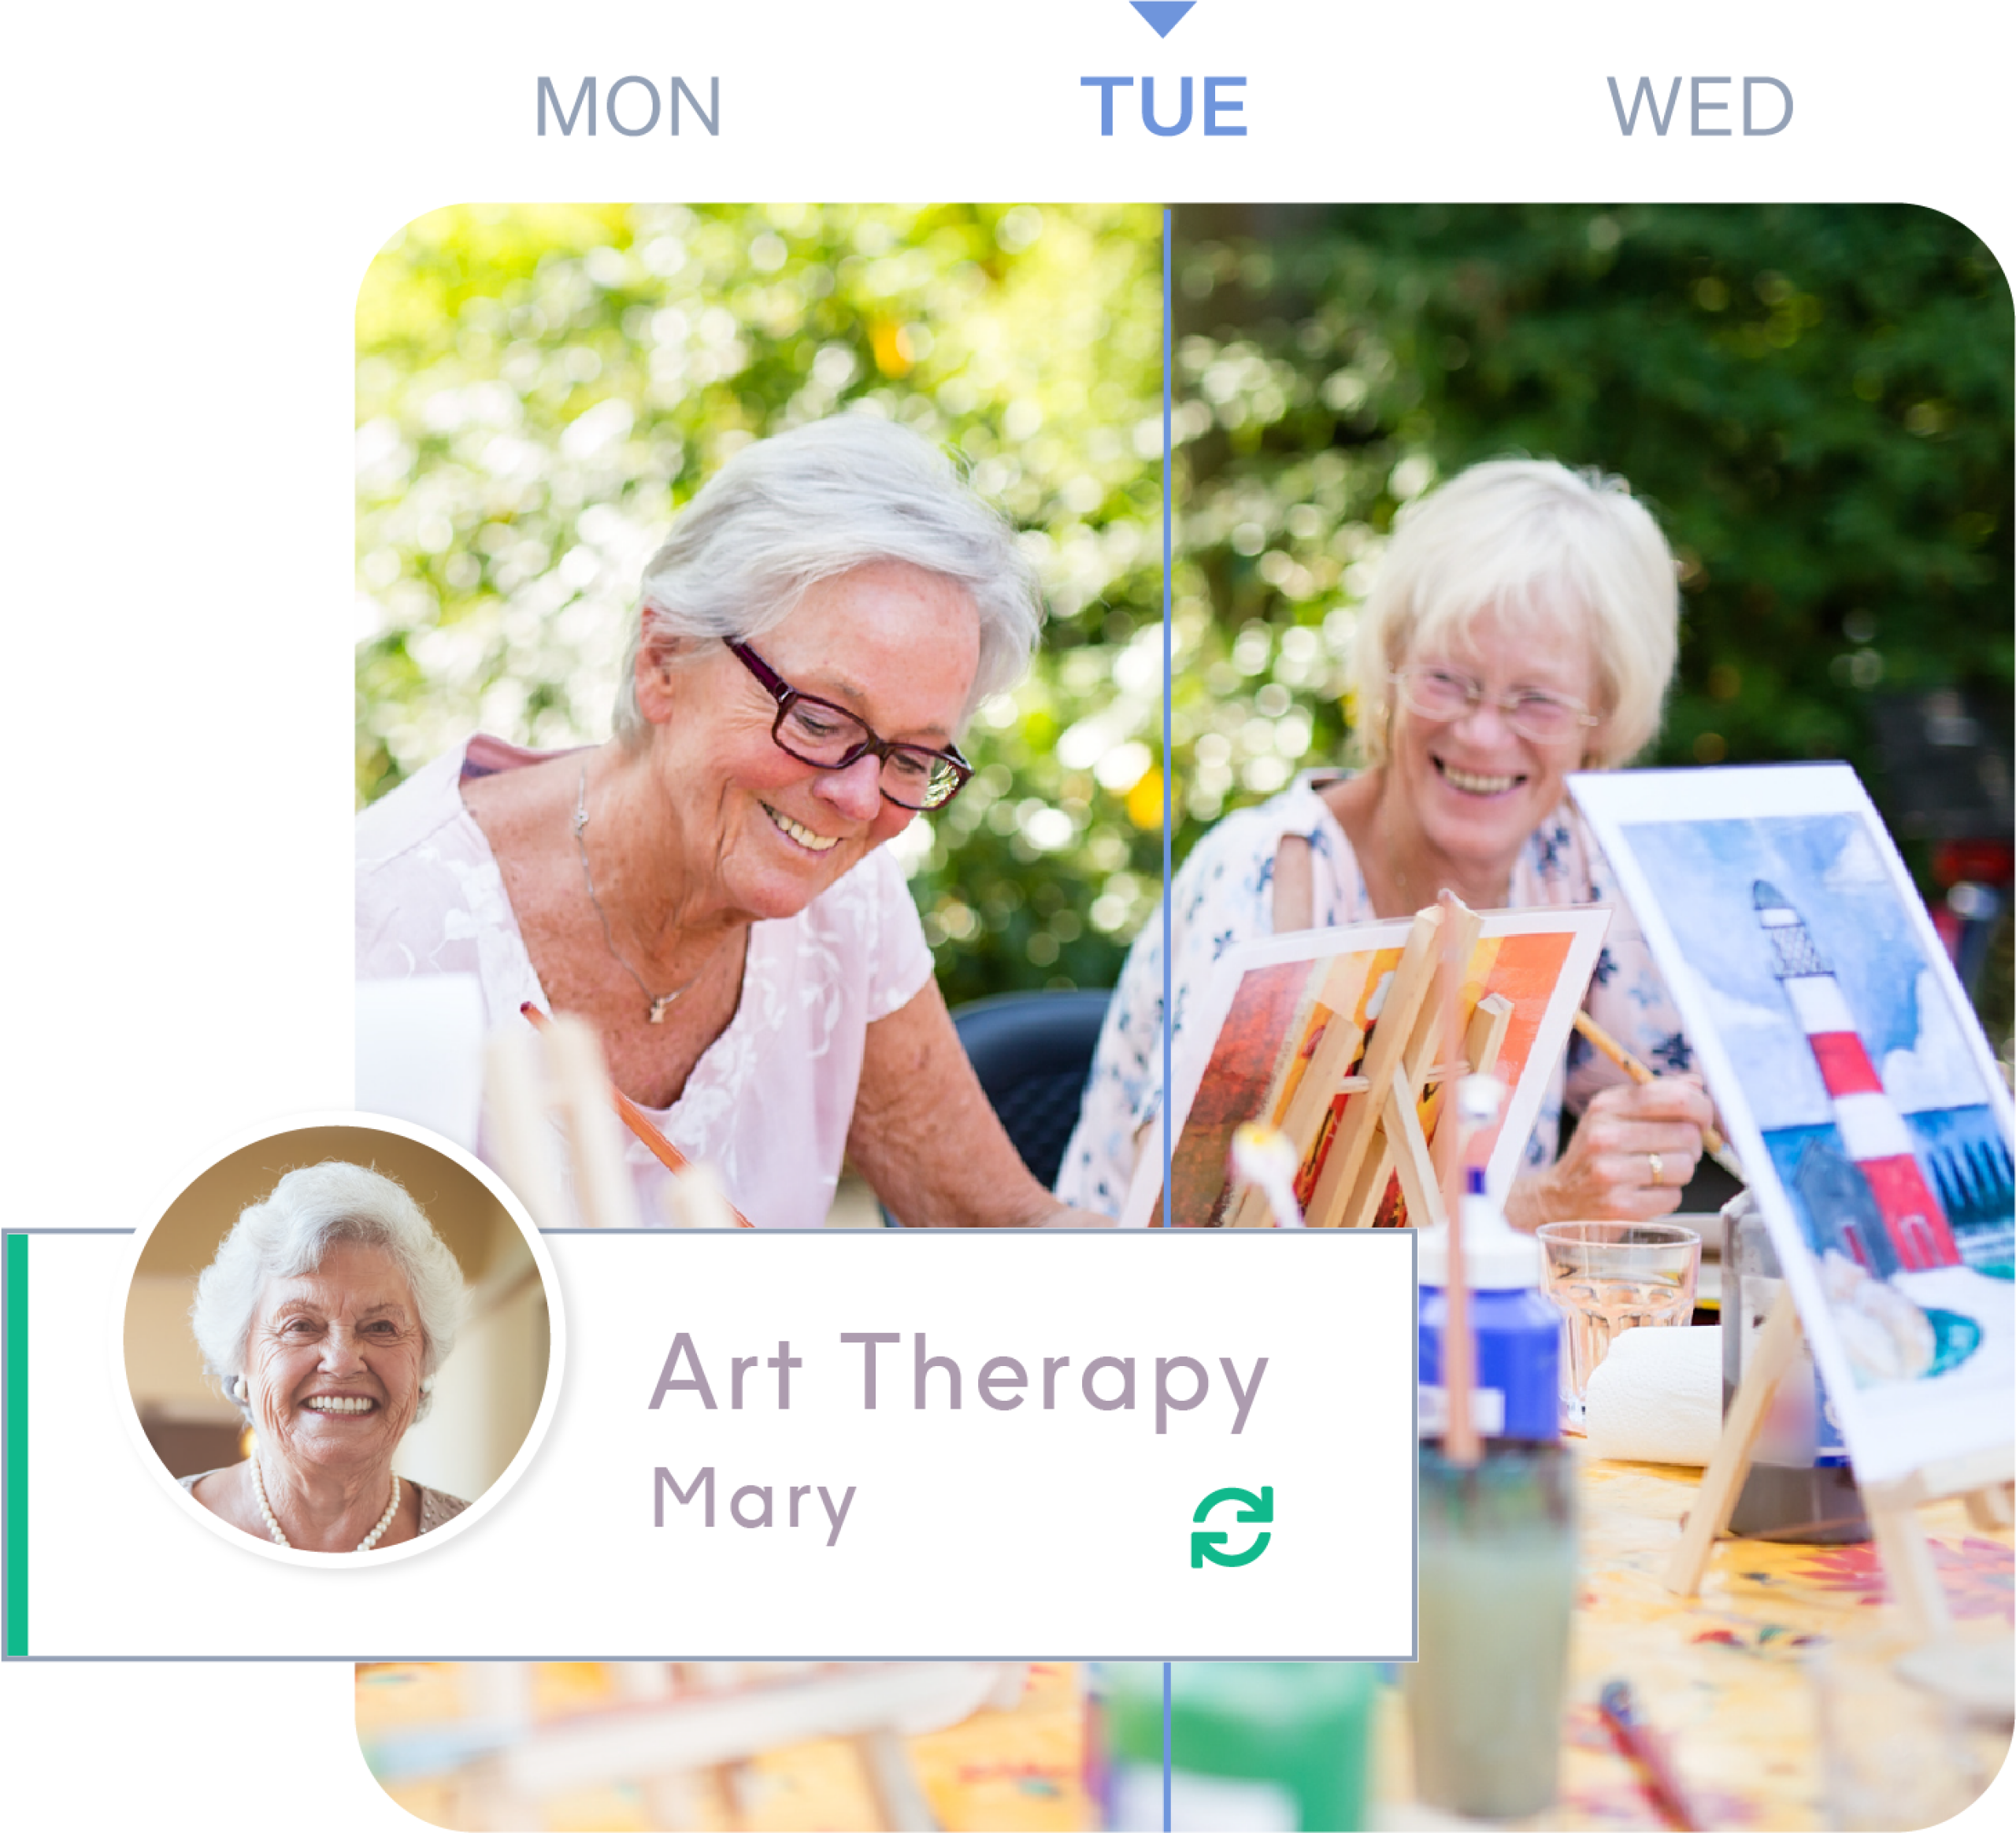 Art therapy session scheduled for an elderly client using ShiftCare's rostering function